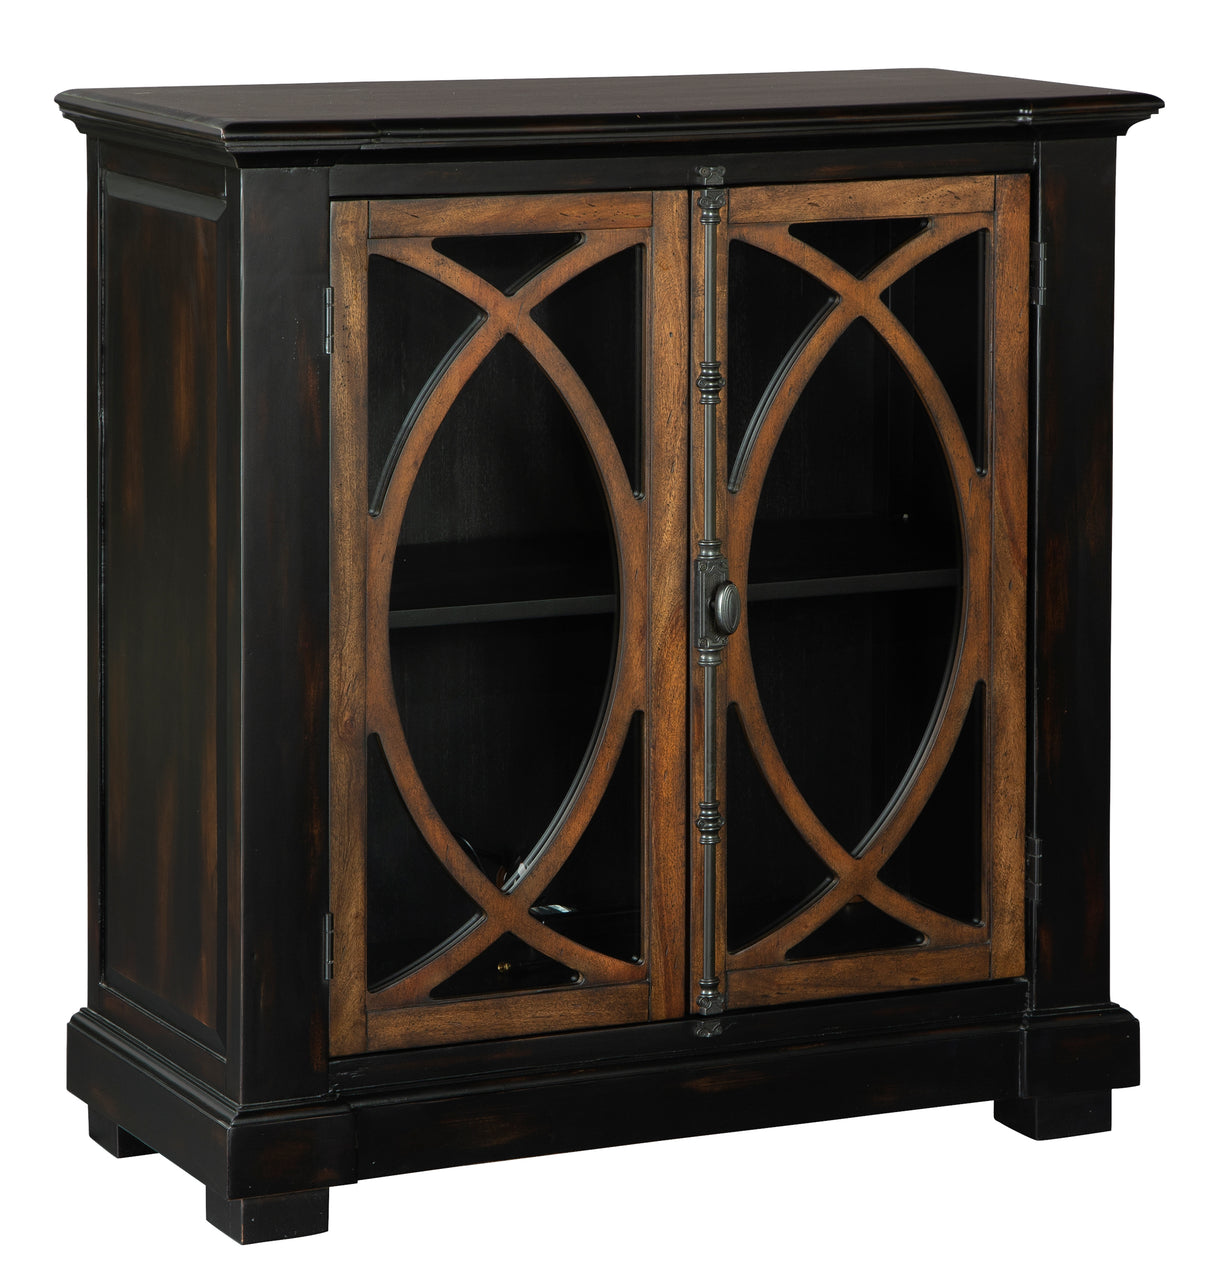 Hekman 28027 Accents 40in. x 18in. x 43.25in. Accent Chest